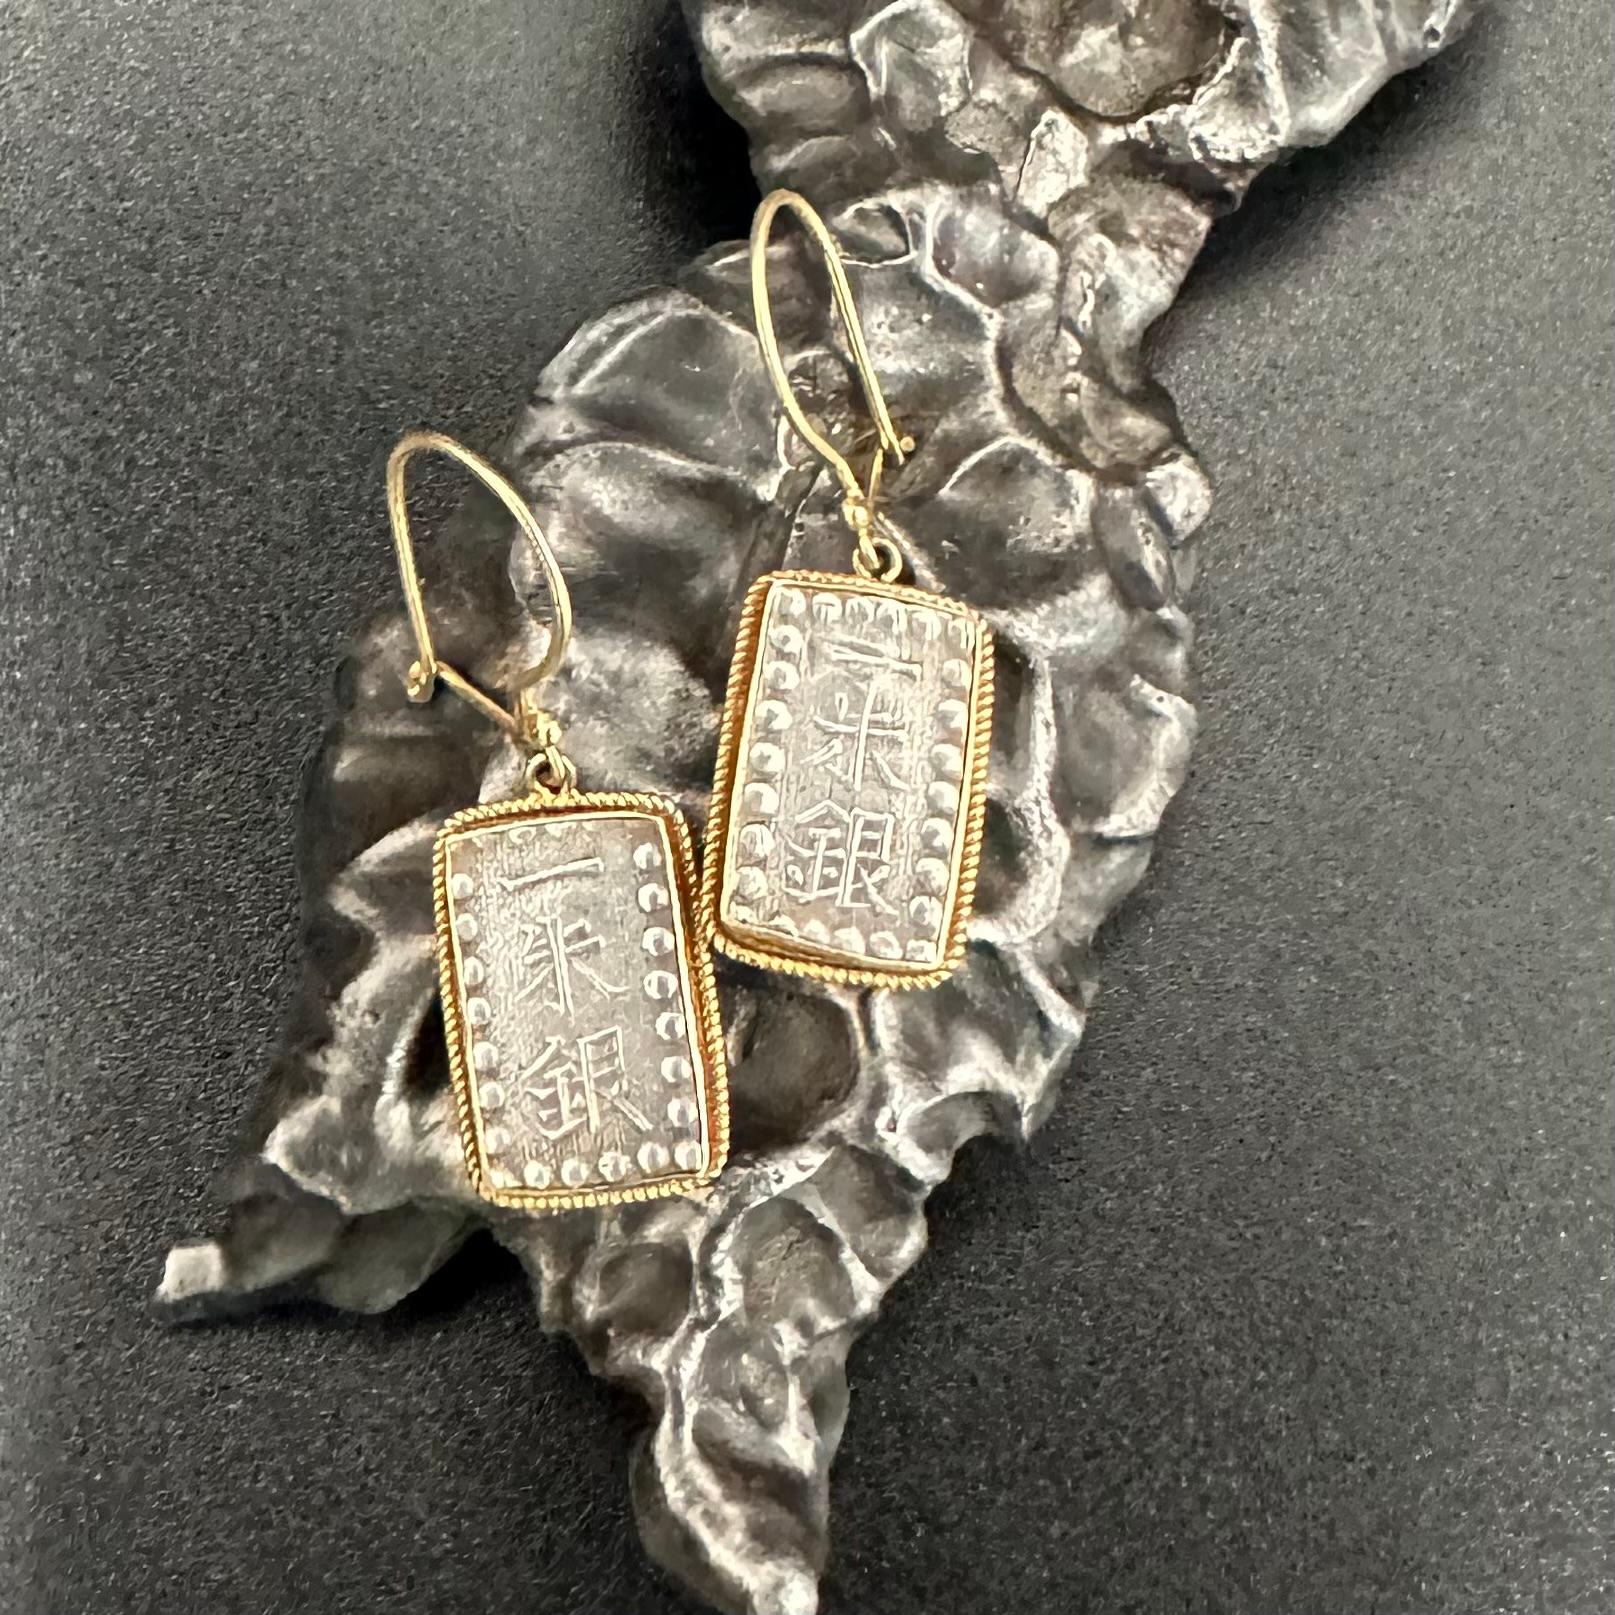 Japan 1800's Shogun Period Rectangular Silver Coins 18K Gold Earrings In New Condition For Sale In Soquel, CA